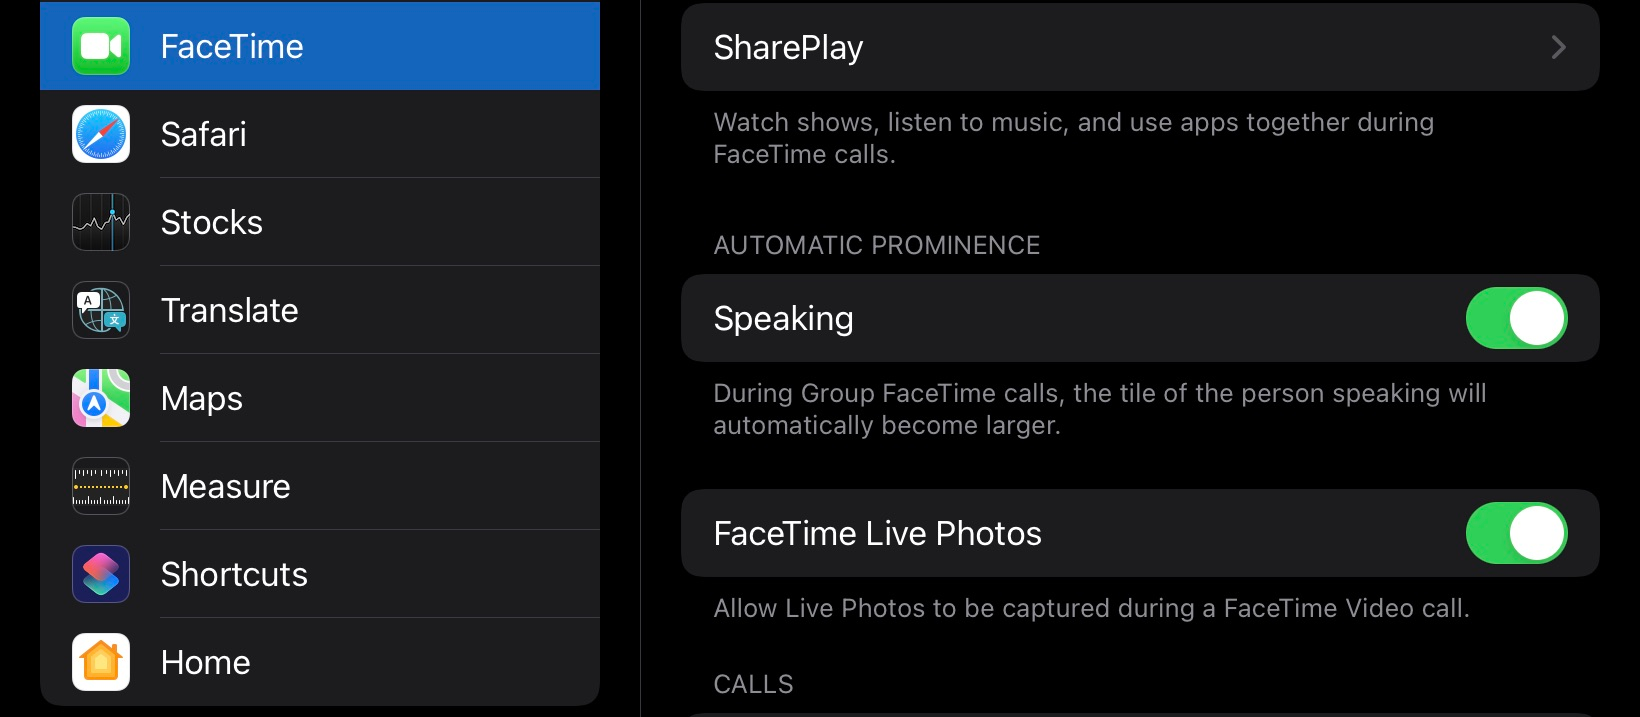 Make sure that everyone on the FaceTime call have FaceTime Live Photos enabled